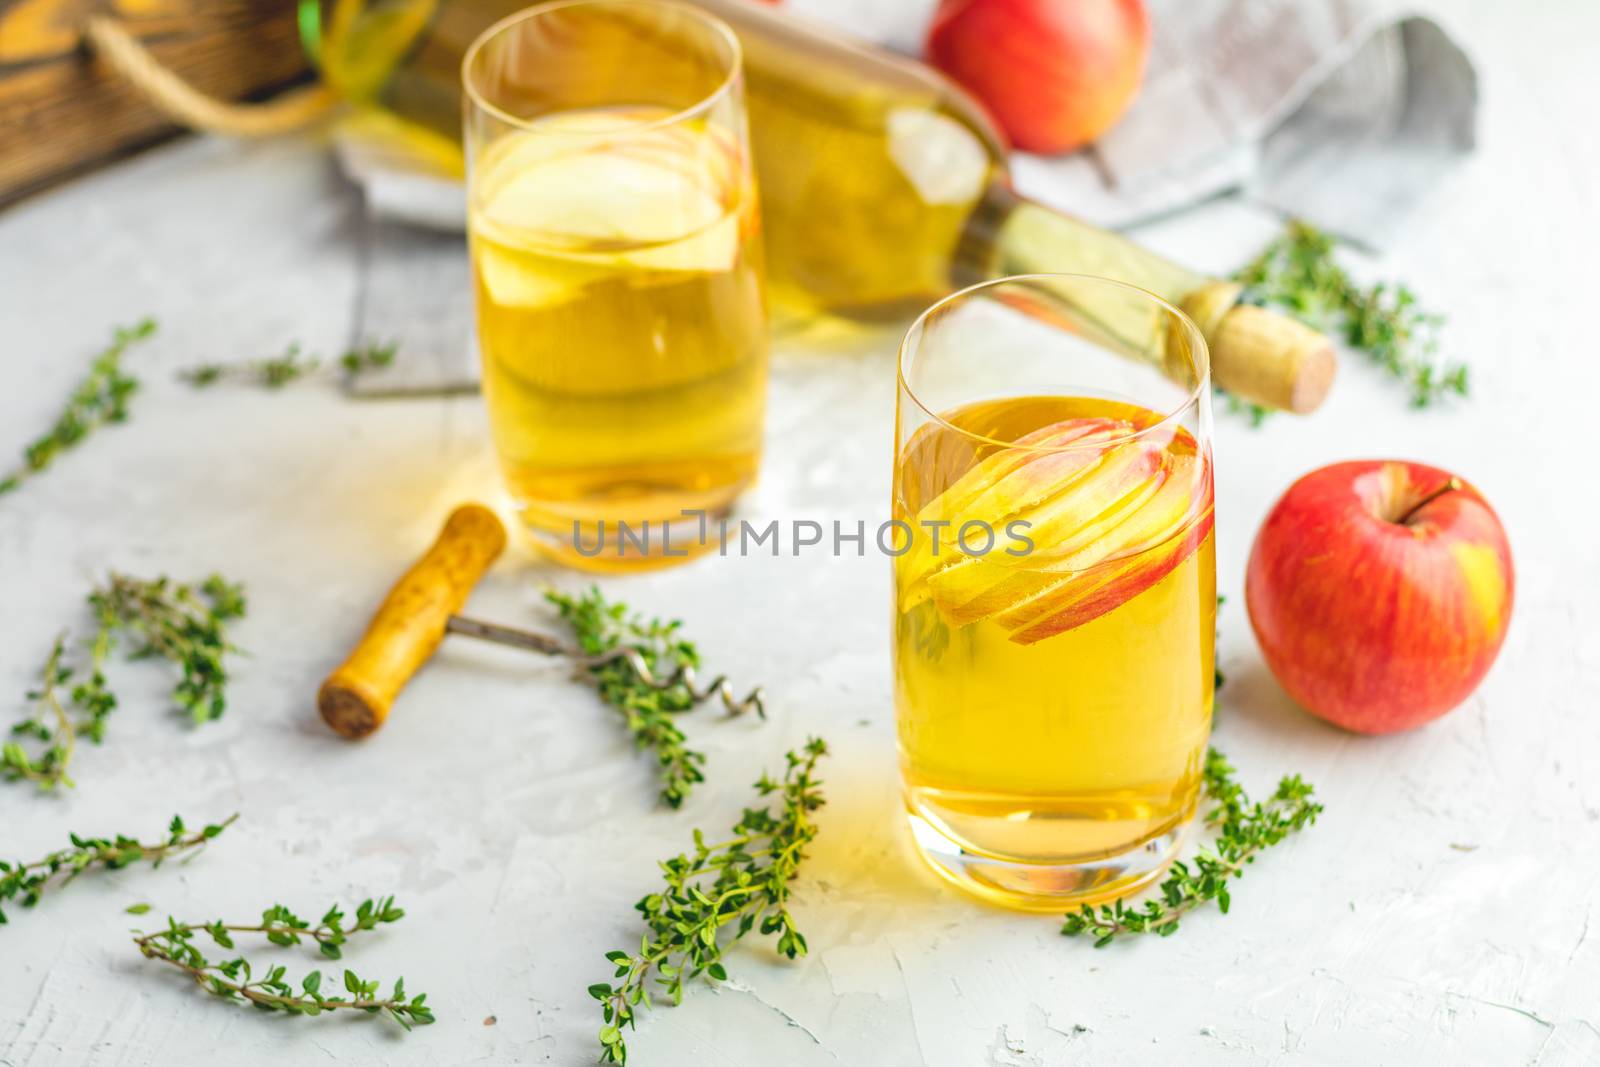 Bottle and glasses of homemade organic apple cider with fresh apples in box, light concrete table surface. Shallow depth of the field.